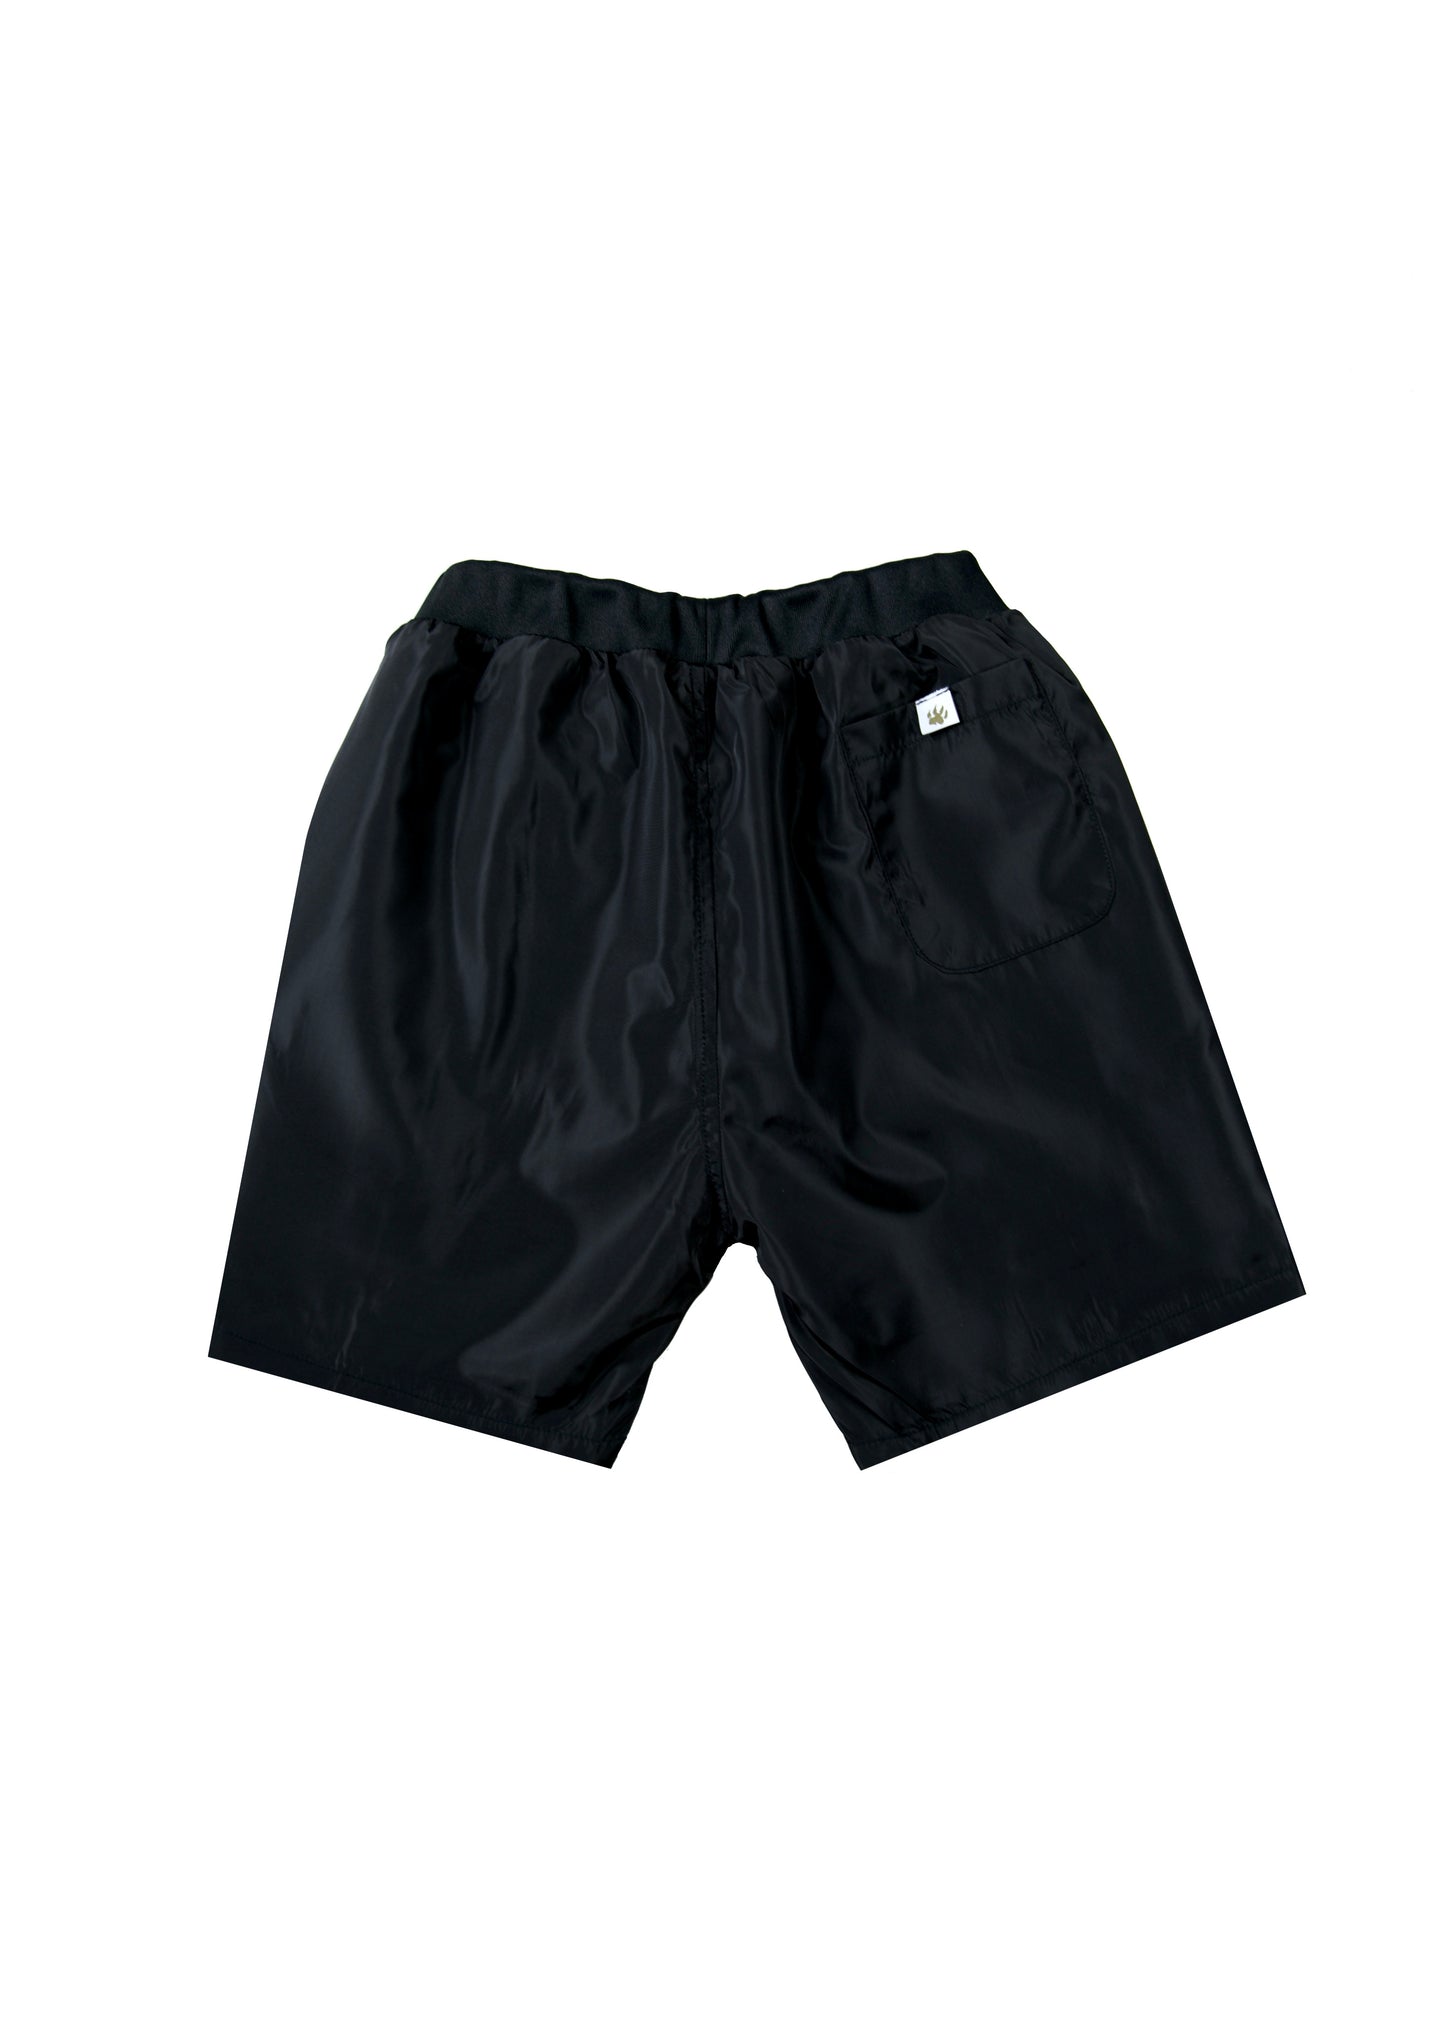 Be Panther Signature Athletic Shorts